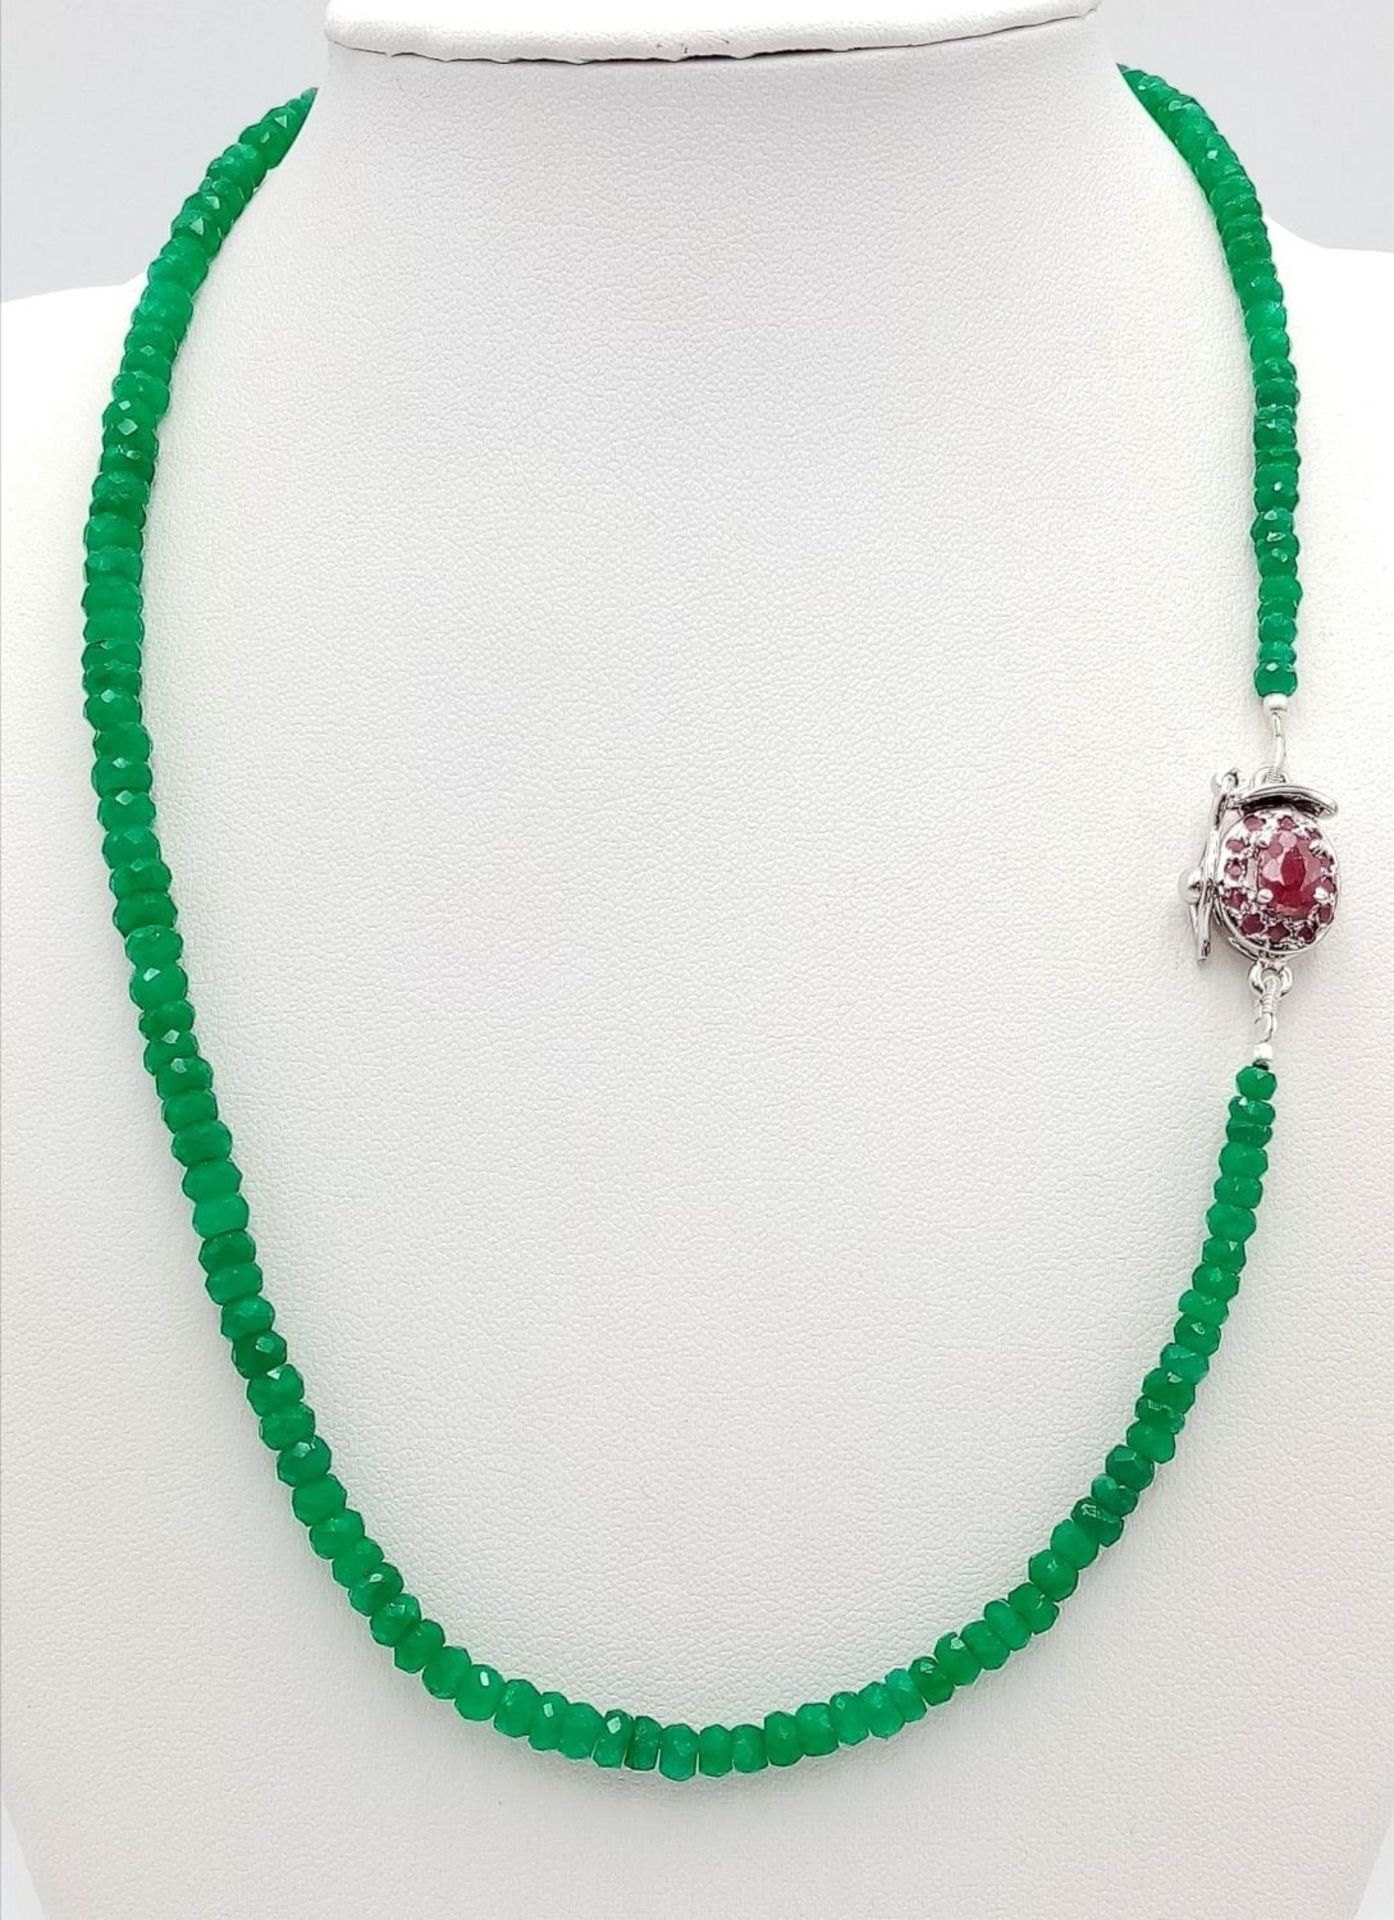 A 95ct Single Strand Emerald Rondelle Necklace with a Ruby and 925 Silver Clasp. 44cm. Ref: Cd-1285